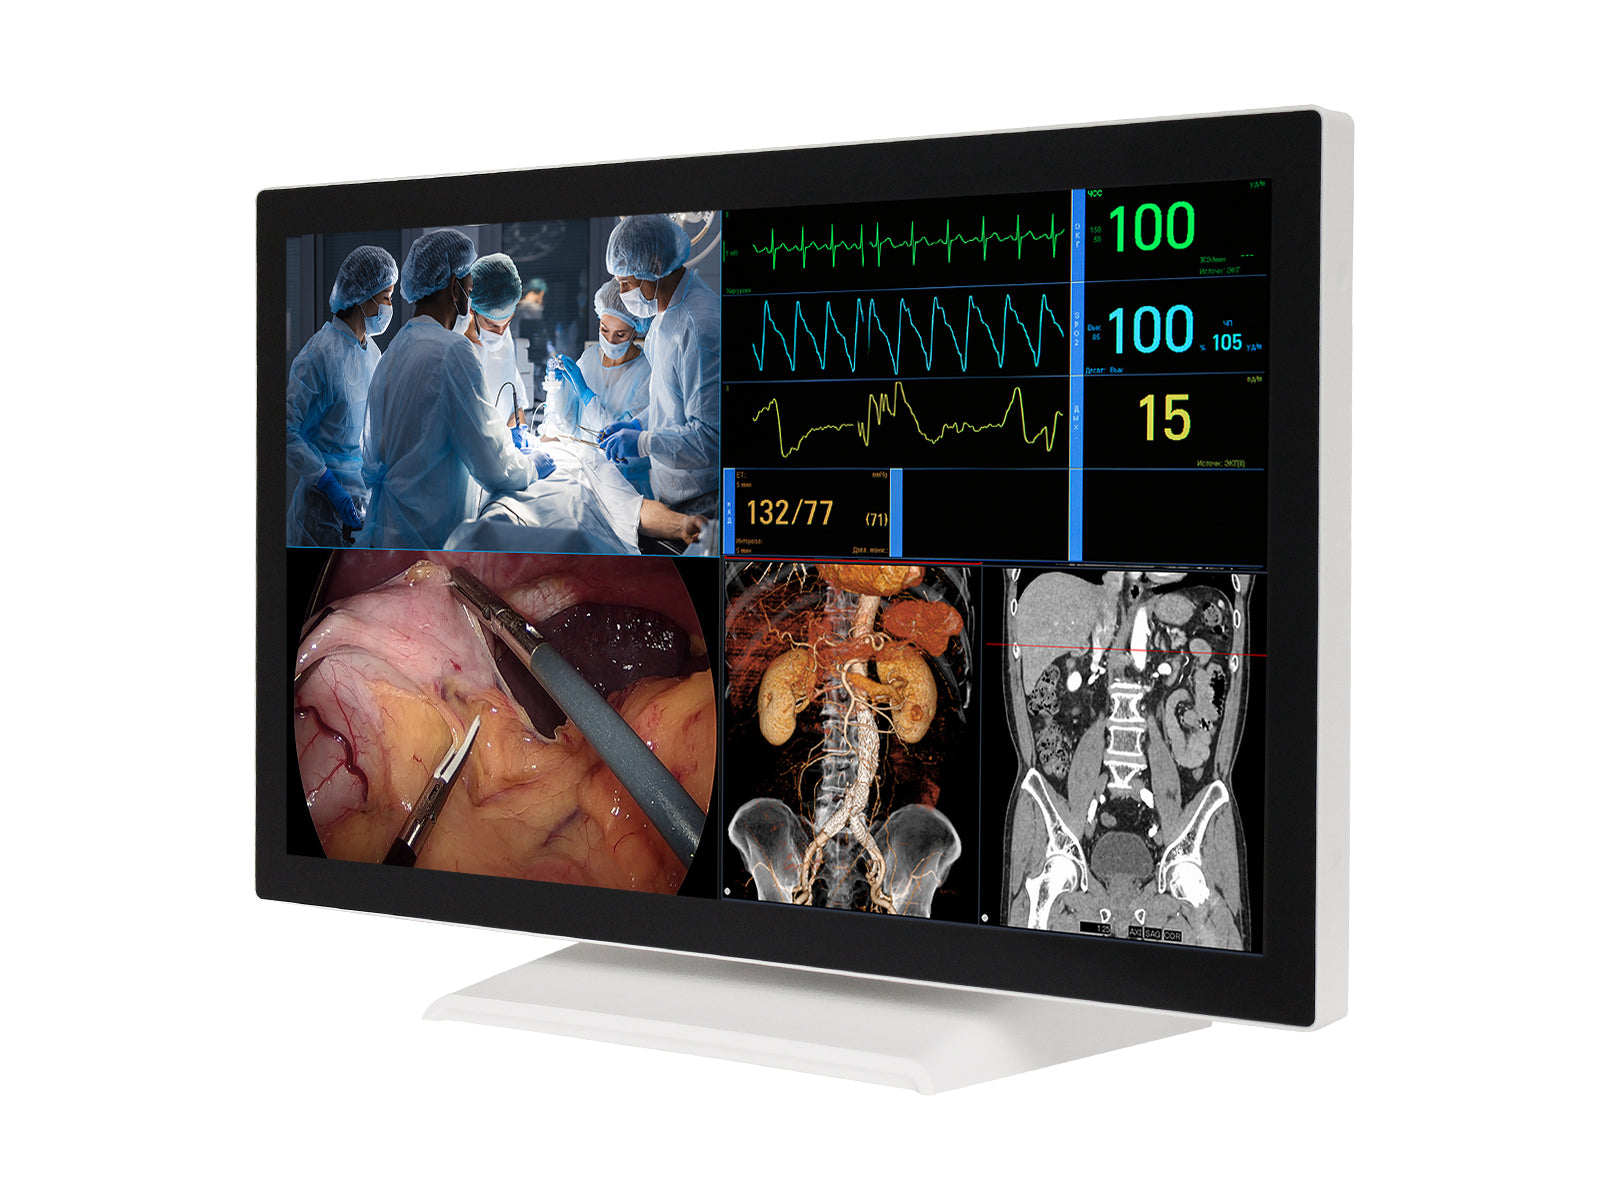 Barco AMM 215WTTP 21.5” Full HD Touchscreen Color Clinical Review Display Monitor Monitors.com 